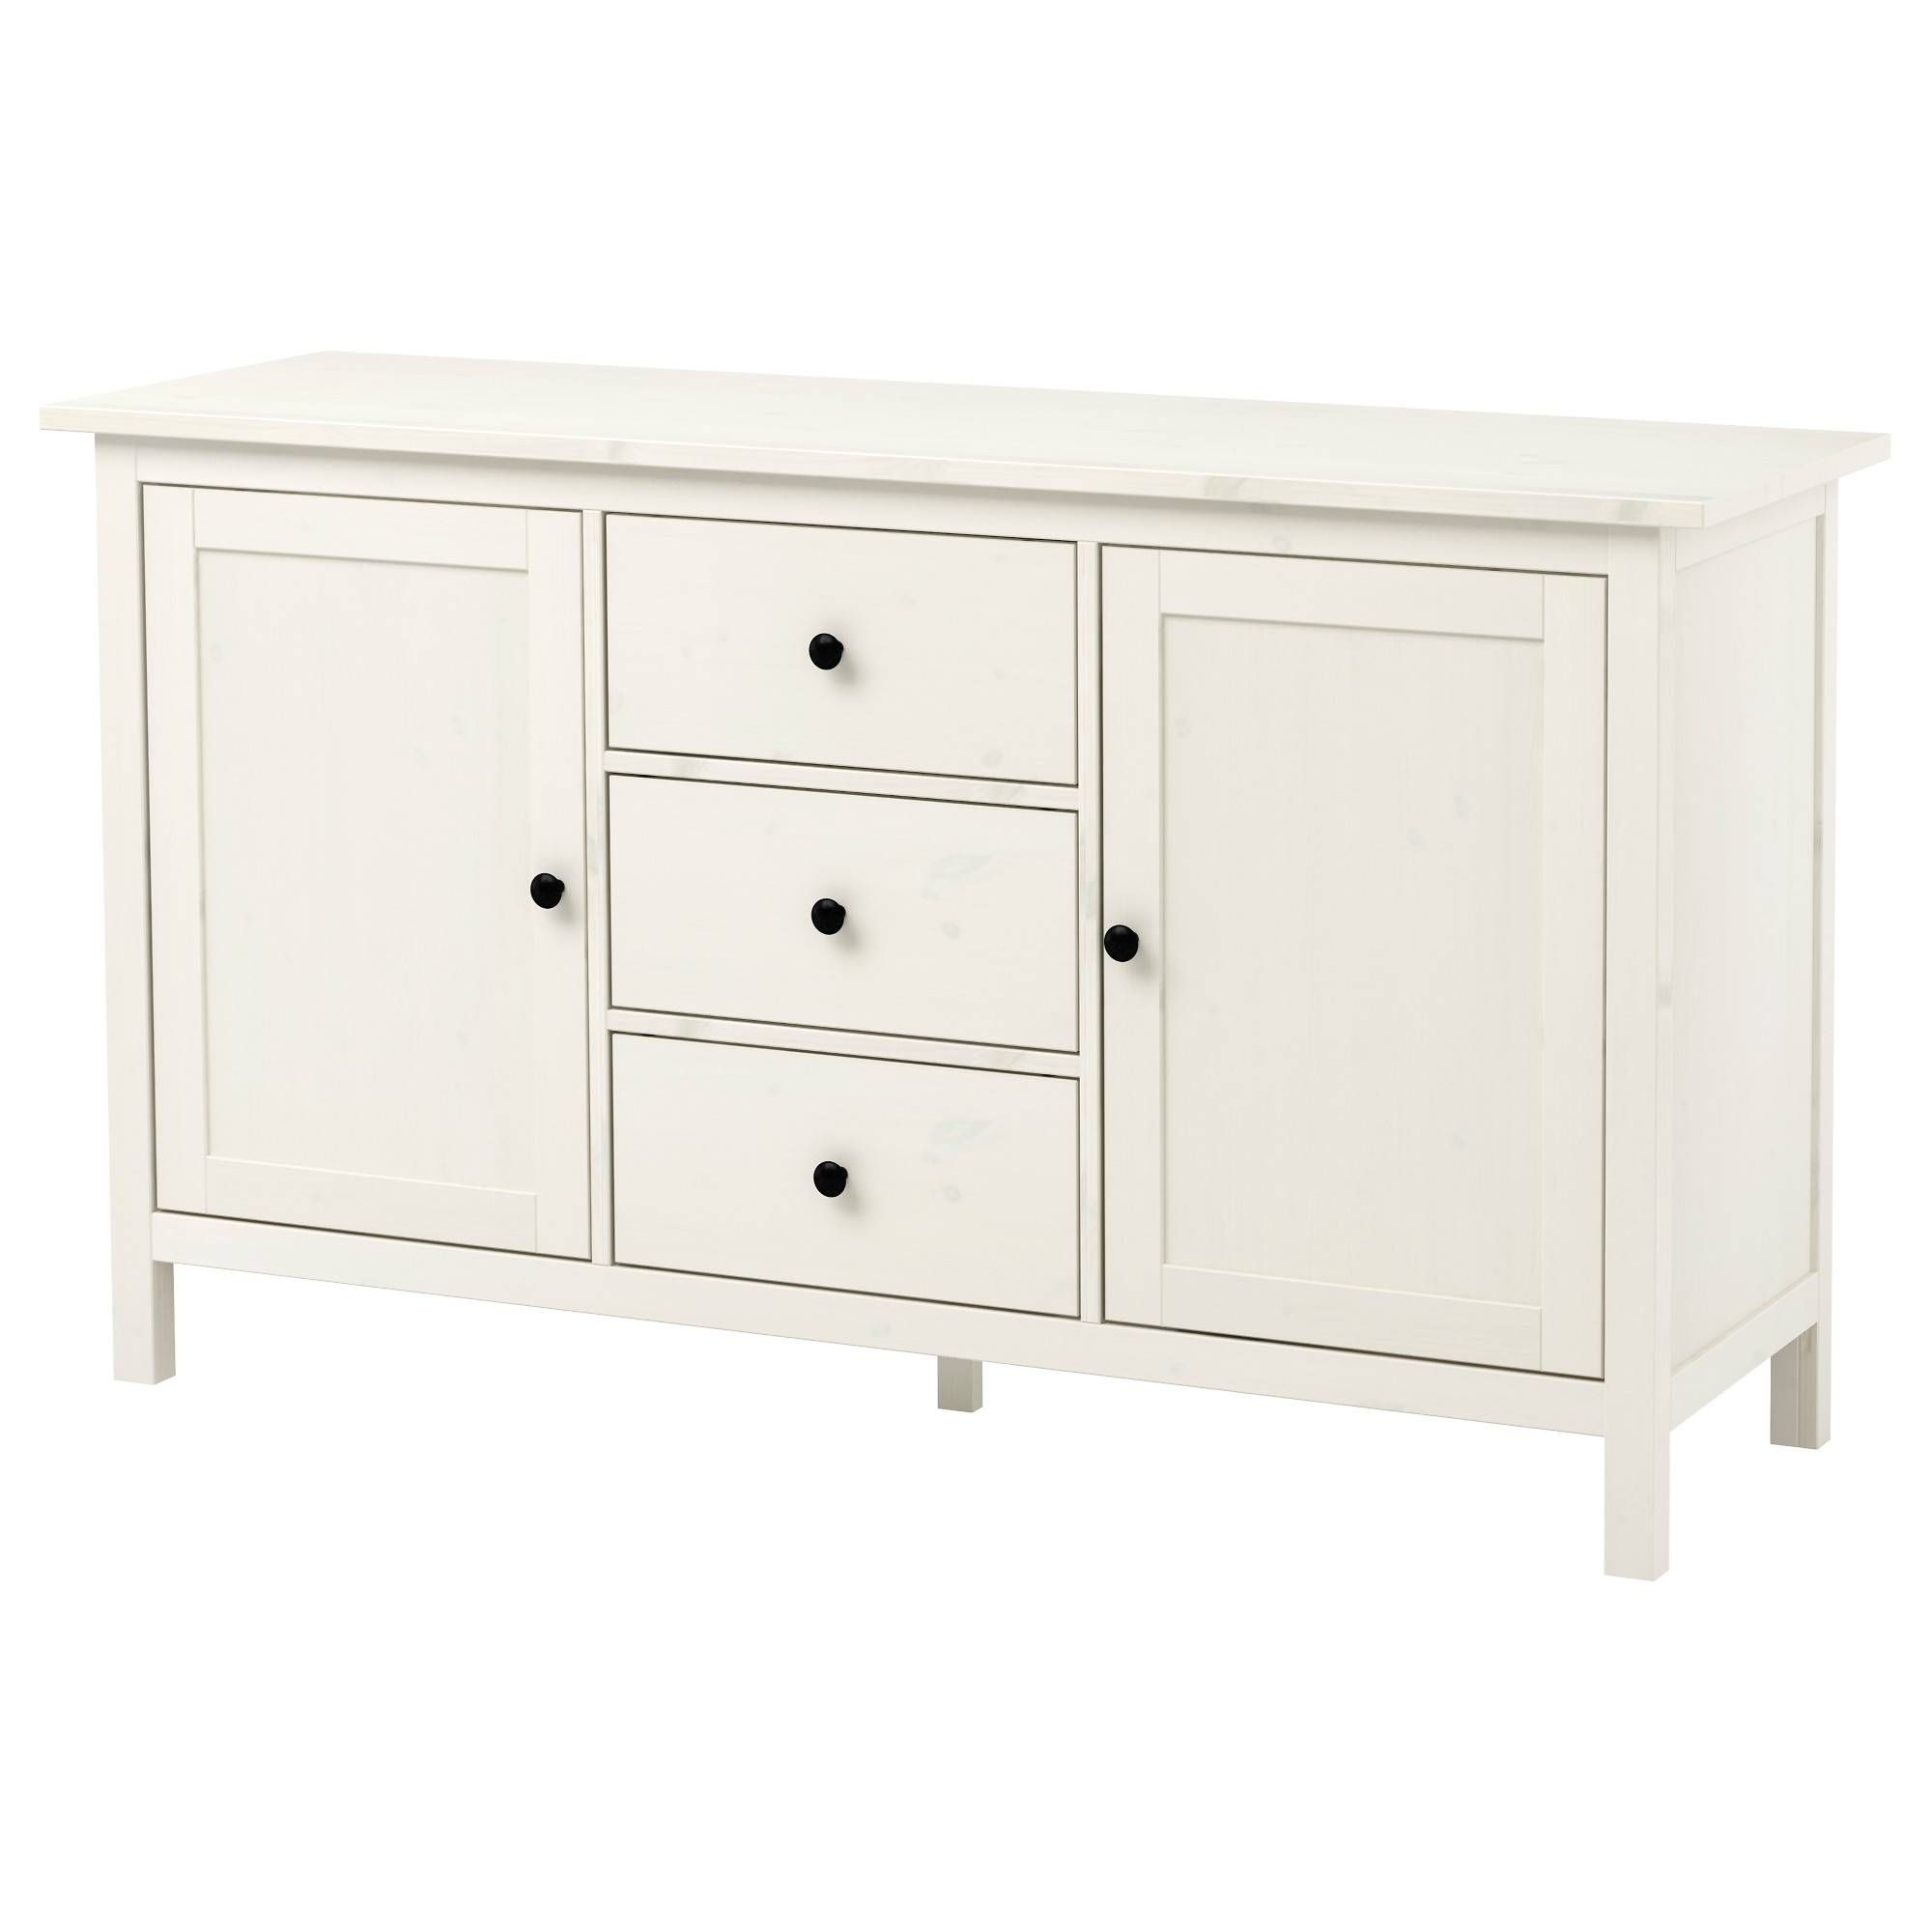 Hemnes Sideboard – White Stain – Ikea For Latest Sideboard Tables (View 7 of 15)